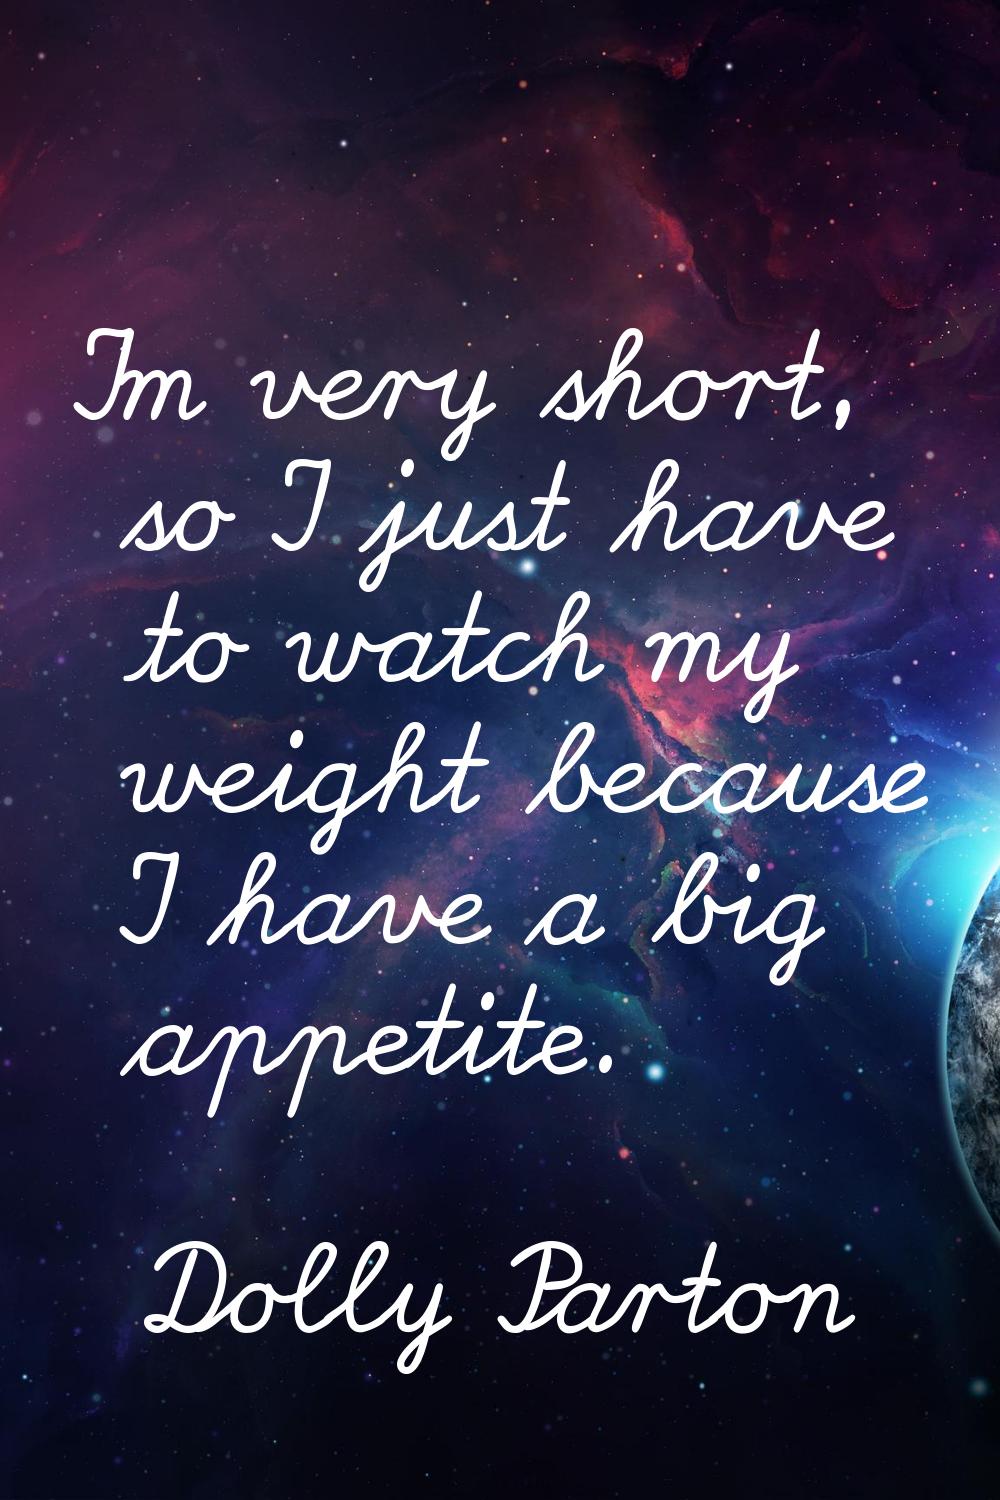 I'm very short, so I just have to watch my weight because I have a big appetite.